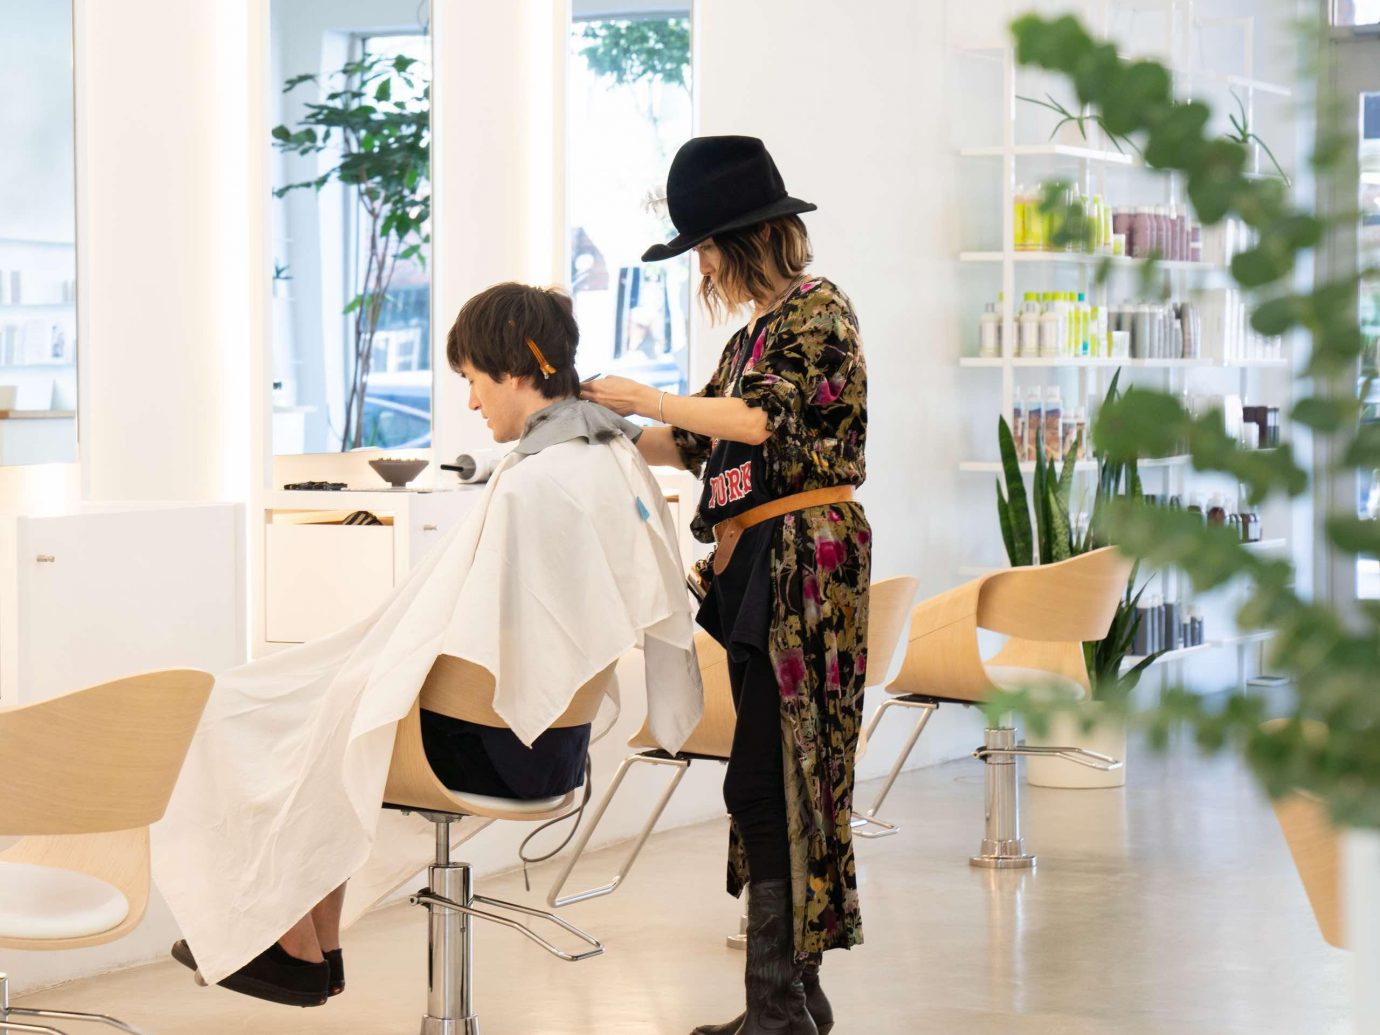 The 11 BEST Hair Salons in NYC Now (2019) - Jetsetter